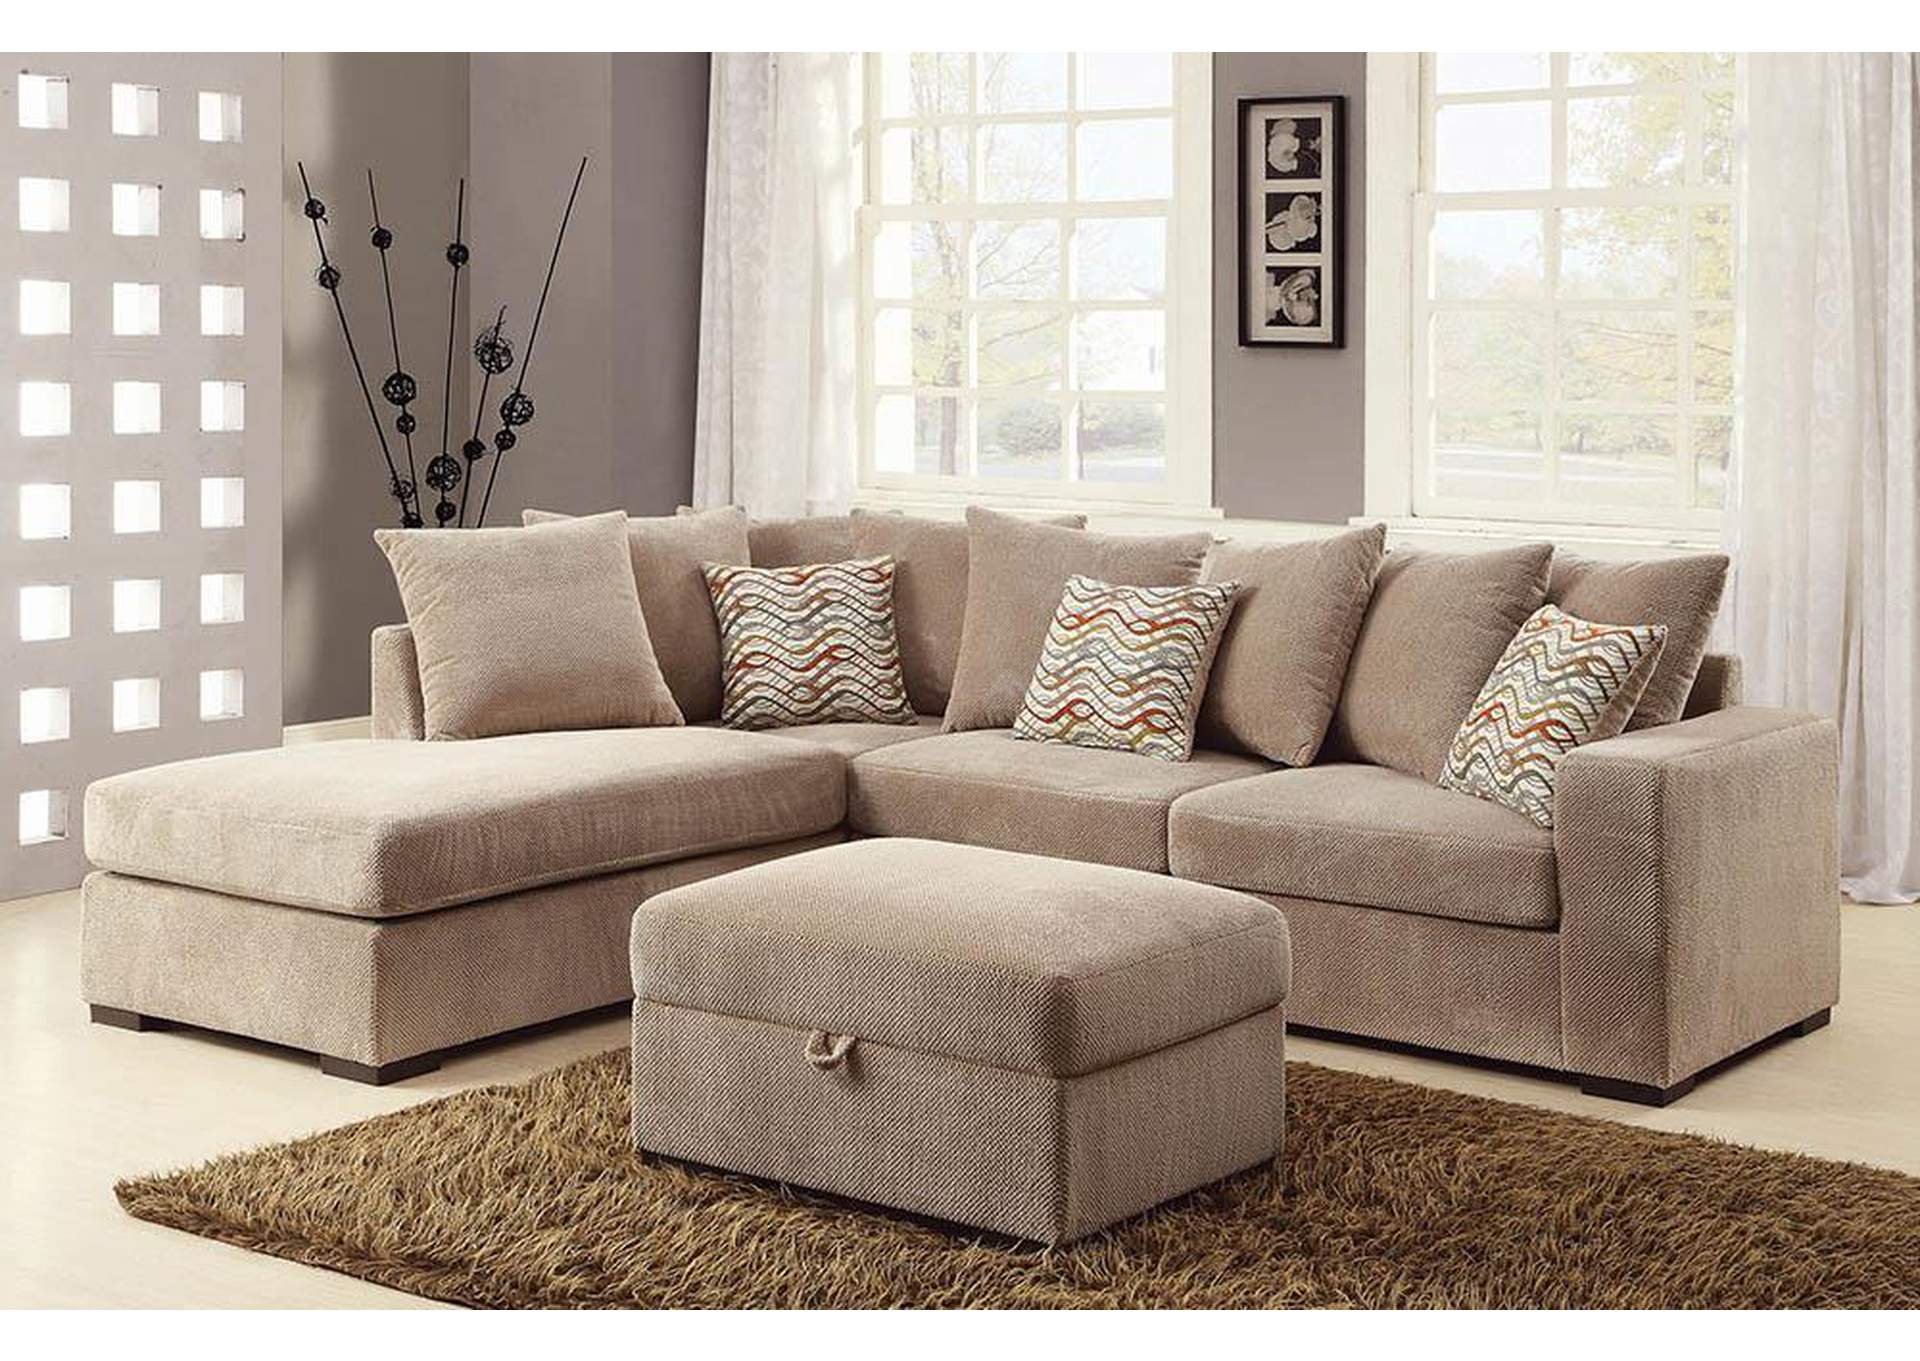 Brown Sectional,ABF Coaster Furniture